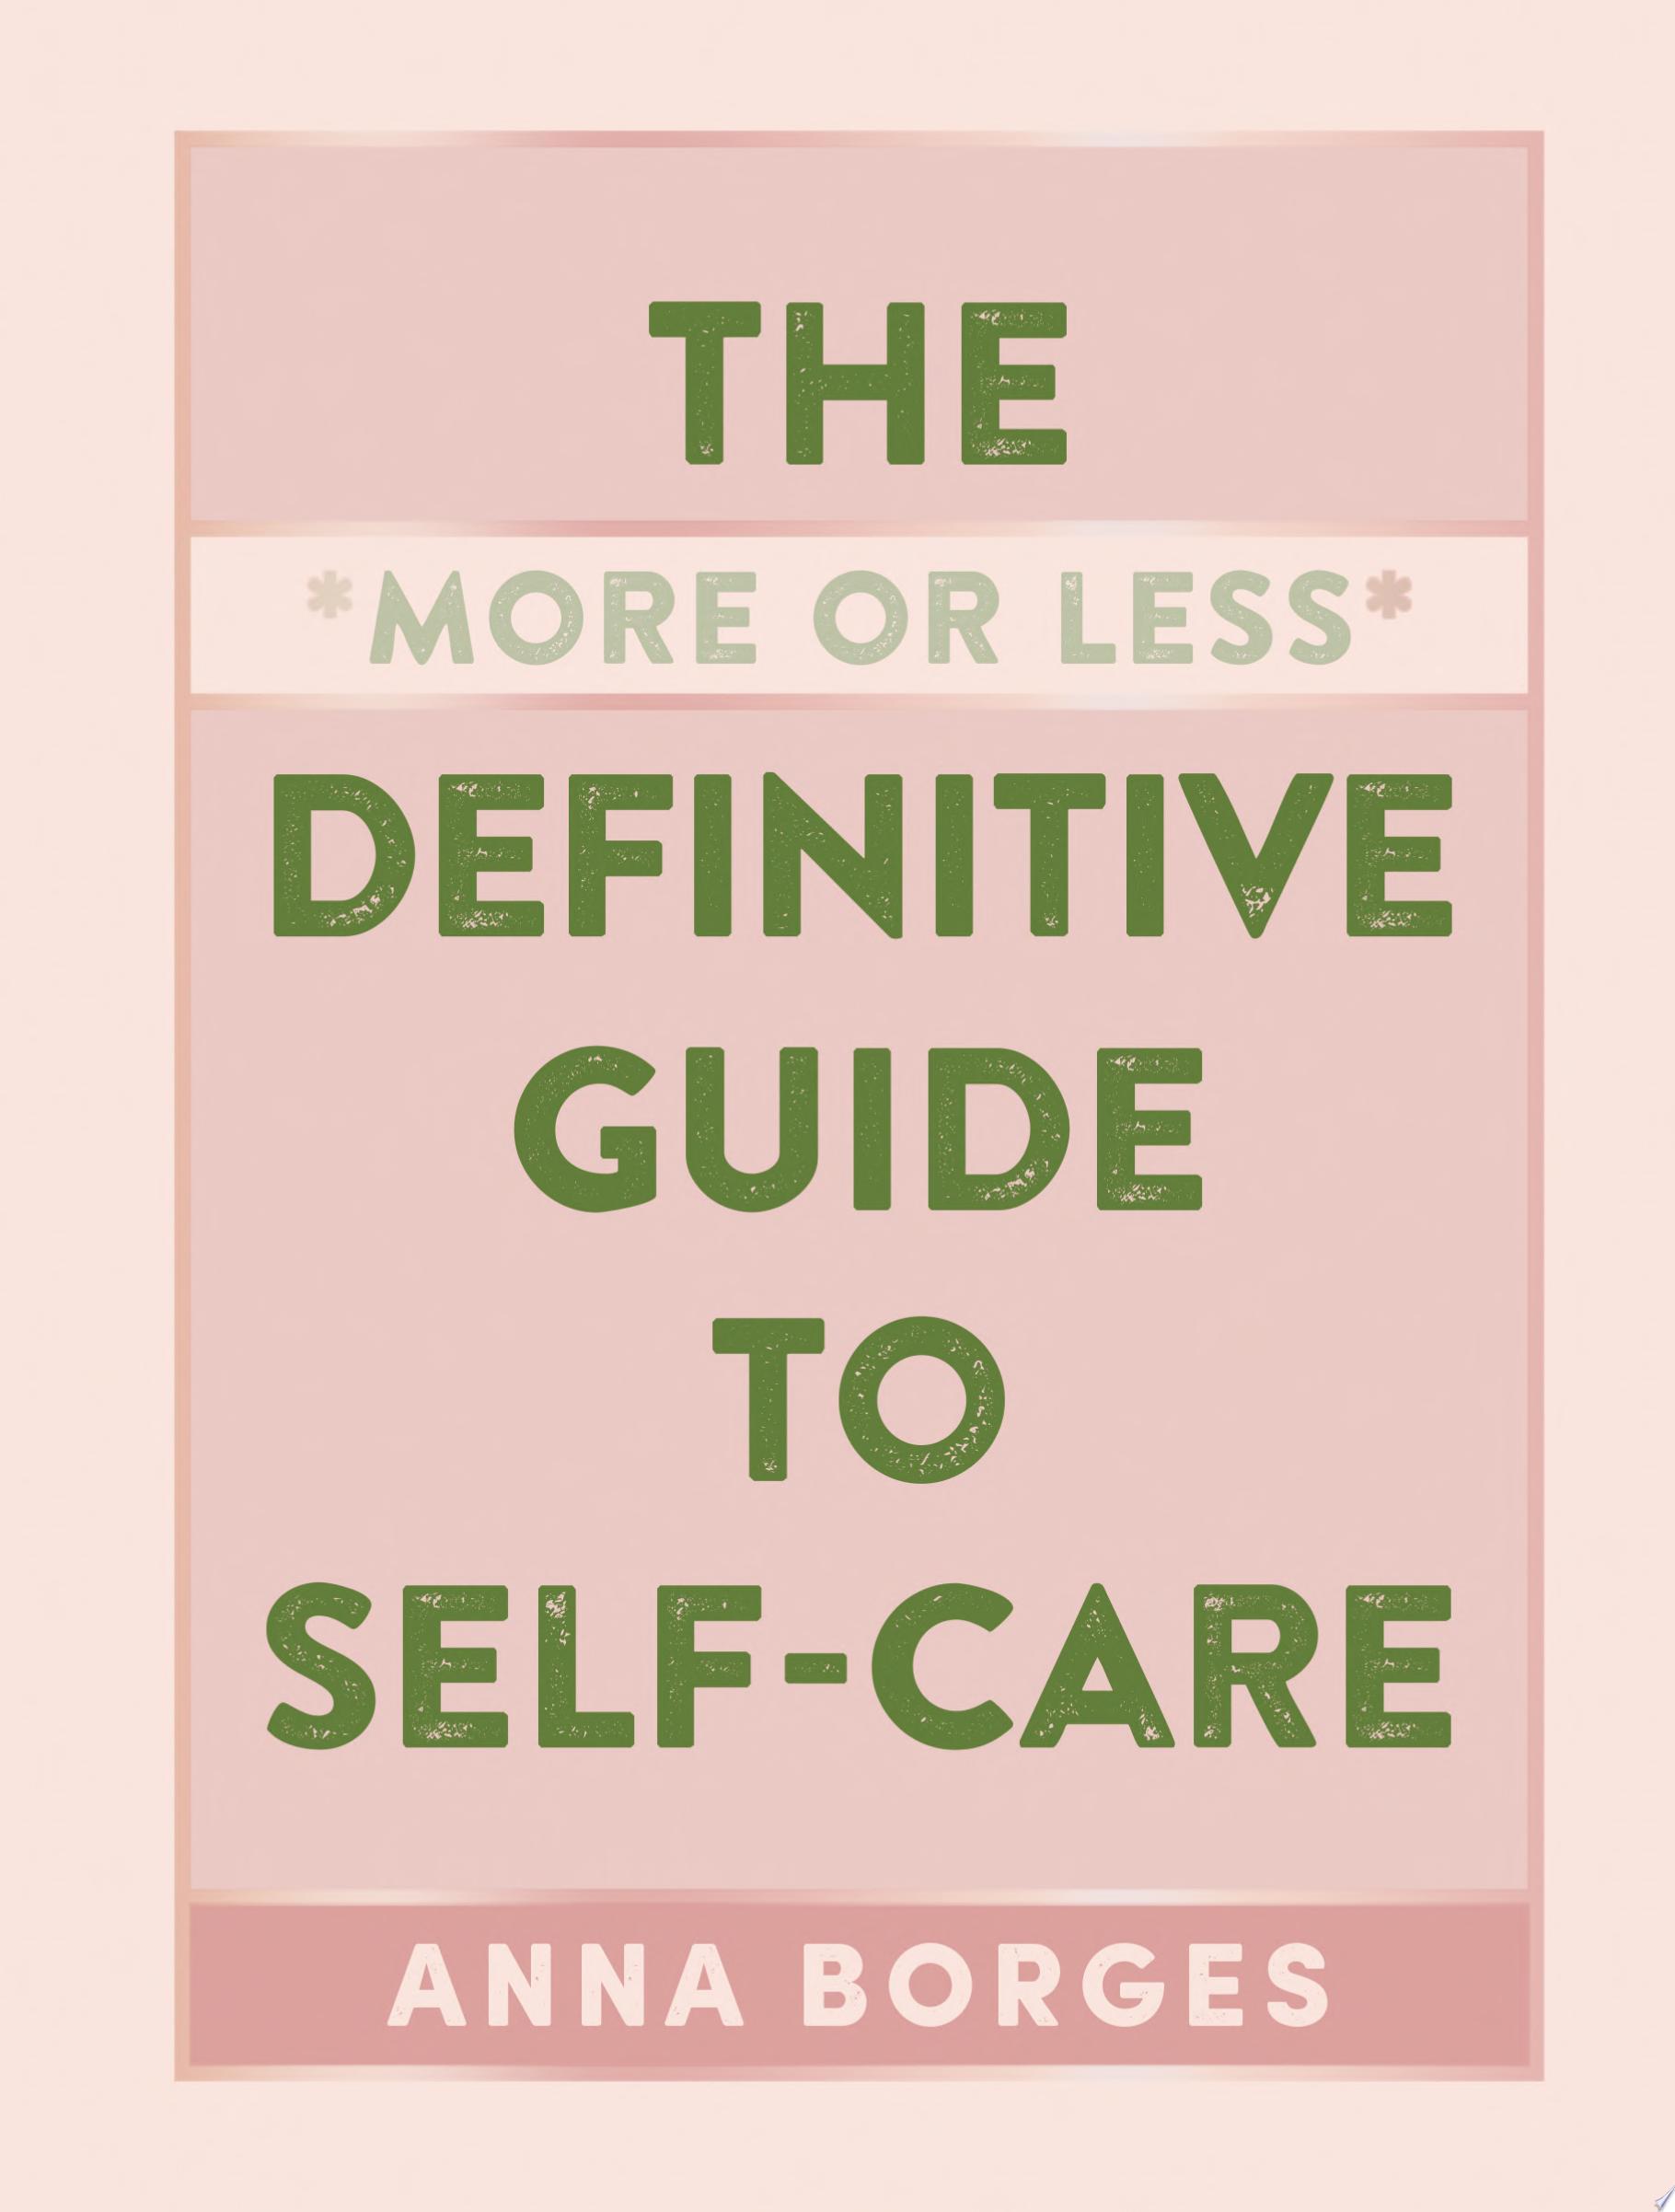 Image for "The More or Less Definitive Guide to Self-Care"